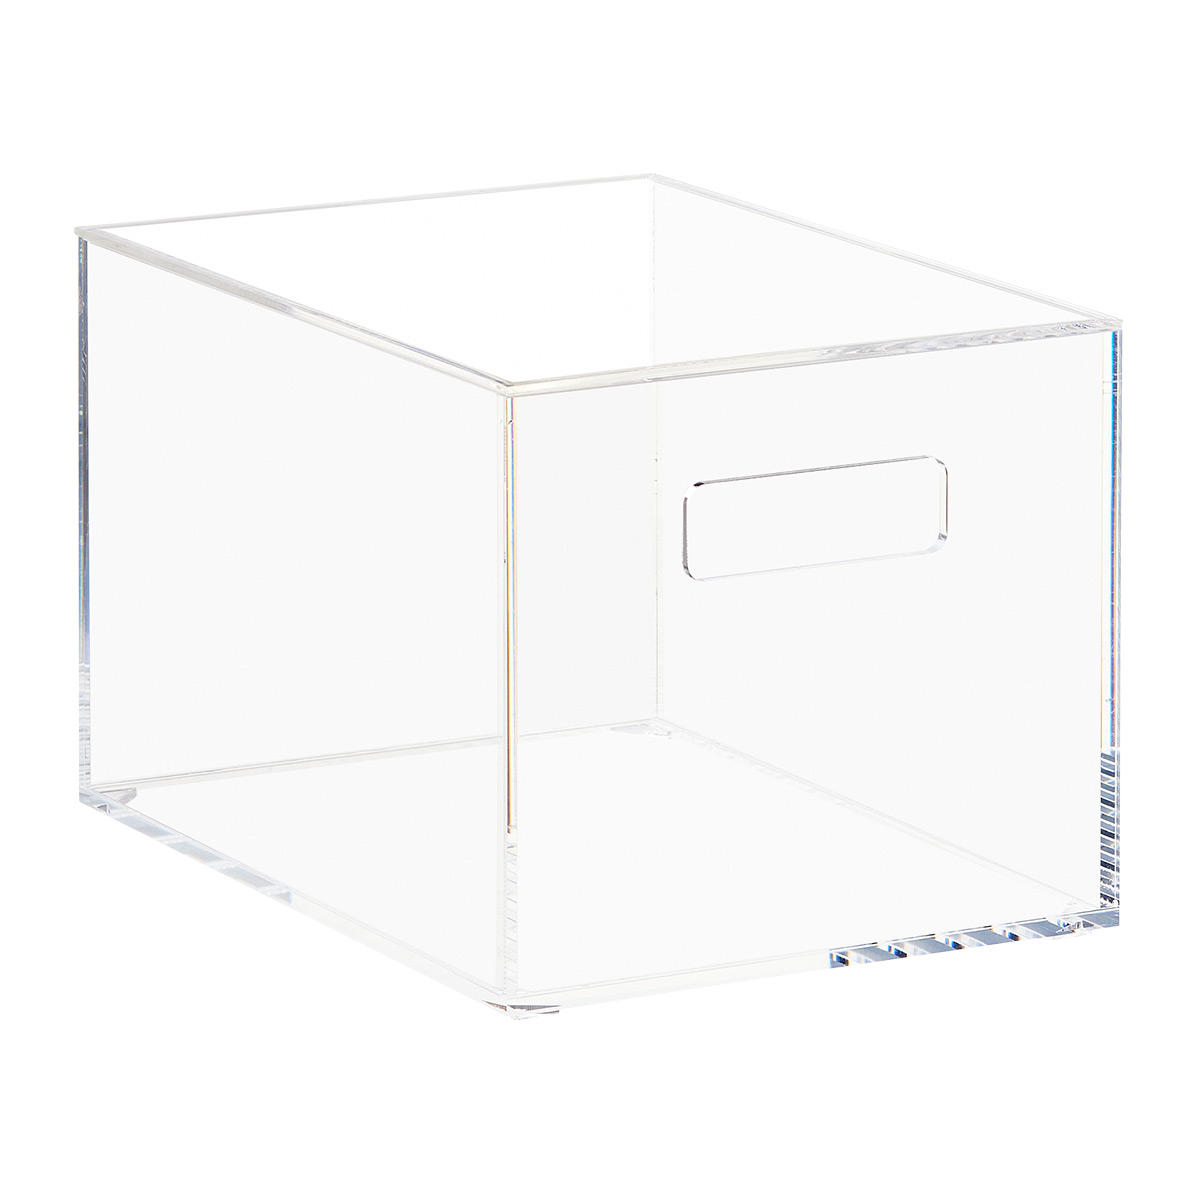 https://www.containerstore.com/catalogimages/480014/10091790g-tcs-small-luxe-acrylic-bin.jpg